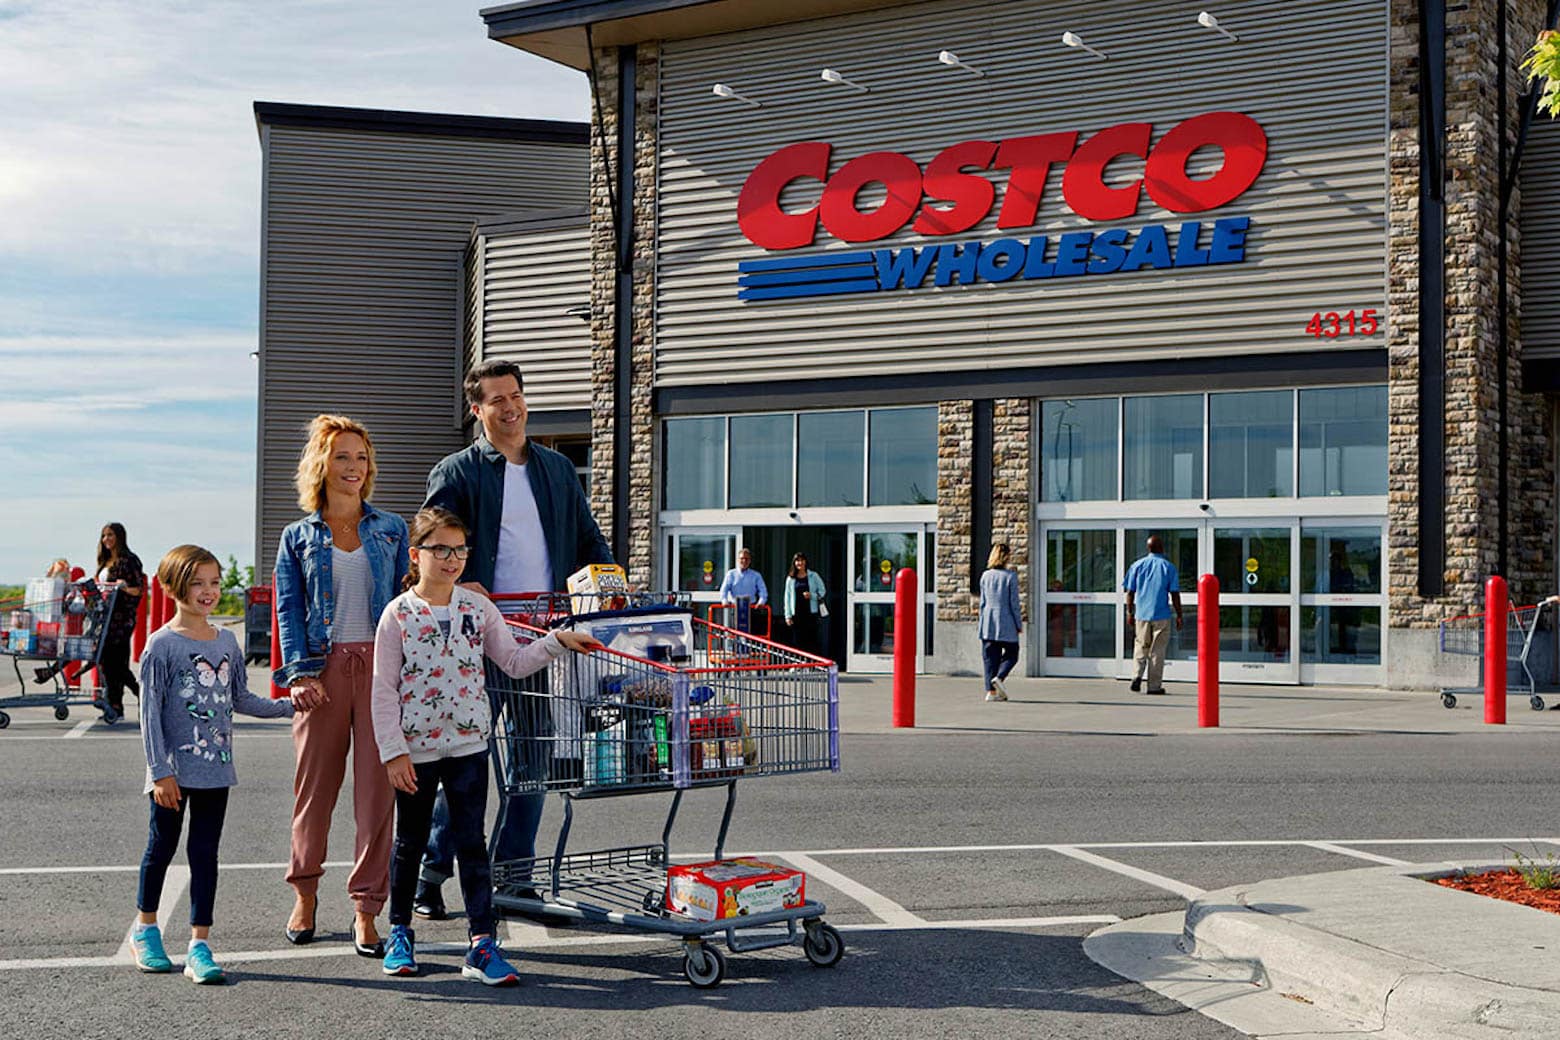 Start your new year strong with a Costco membership